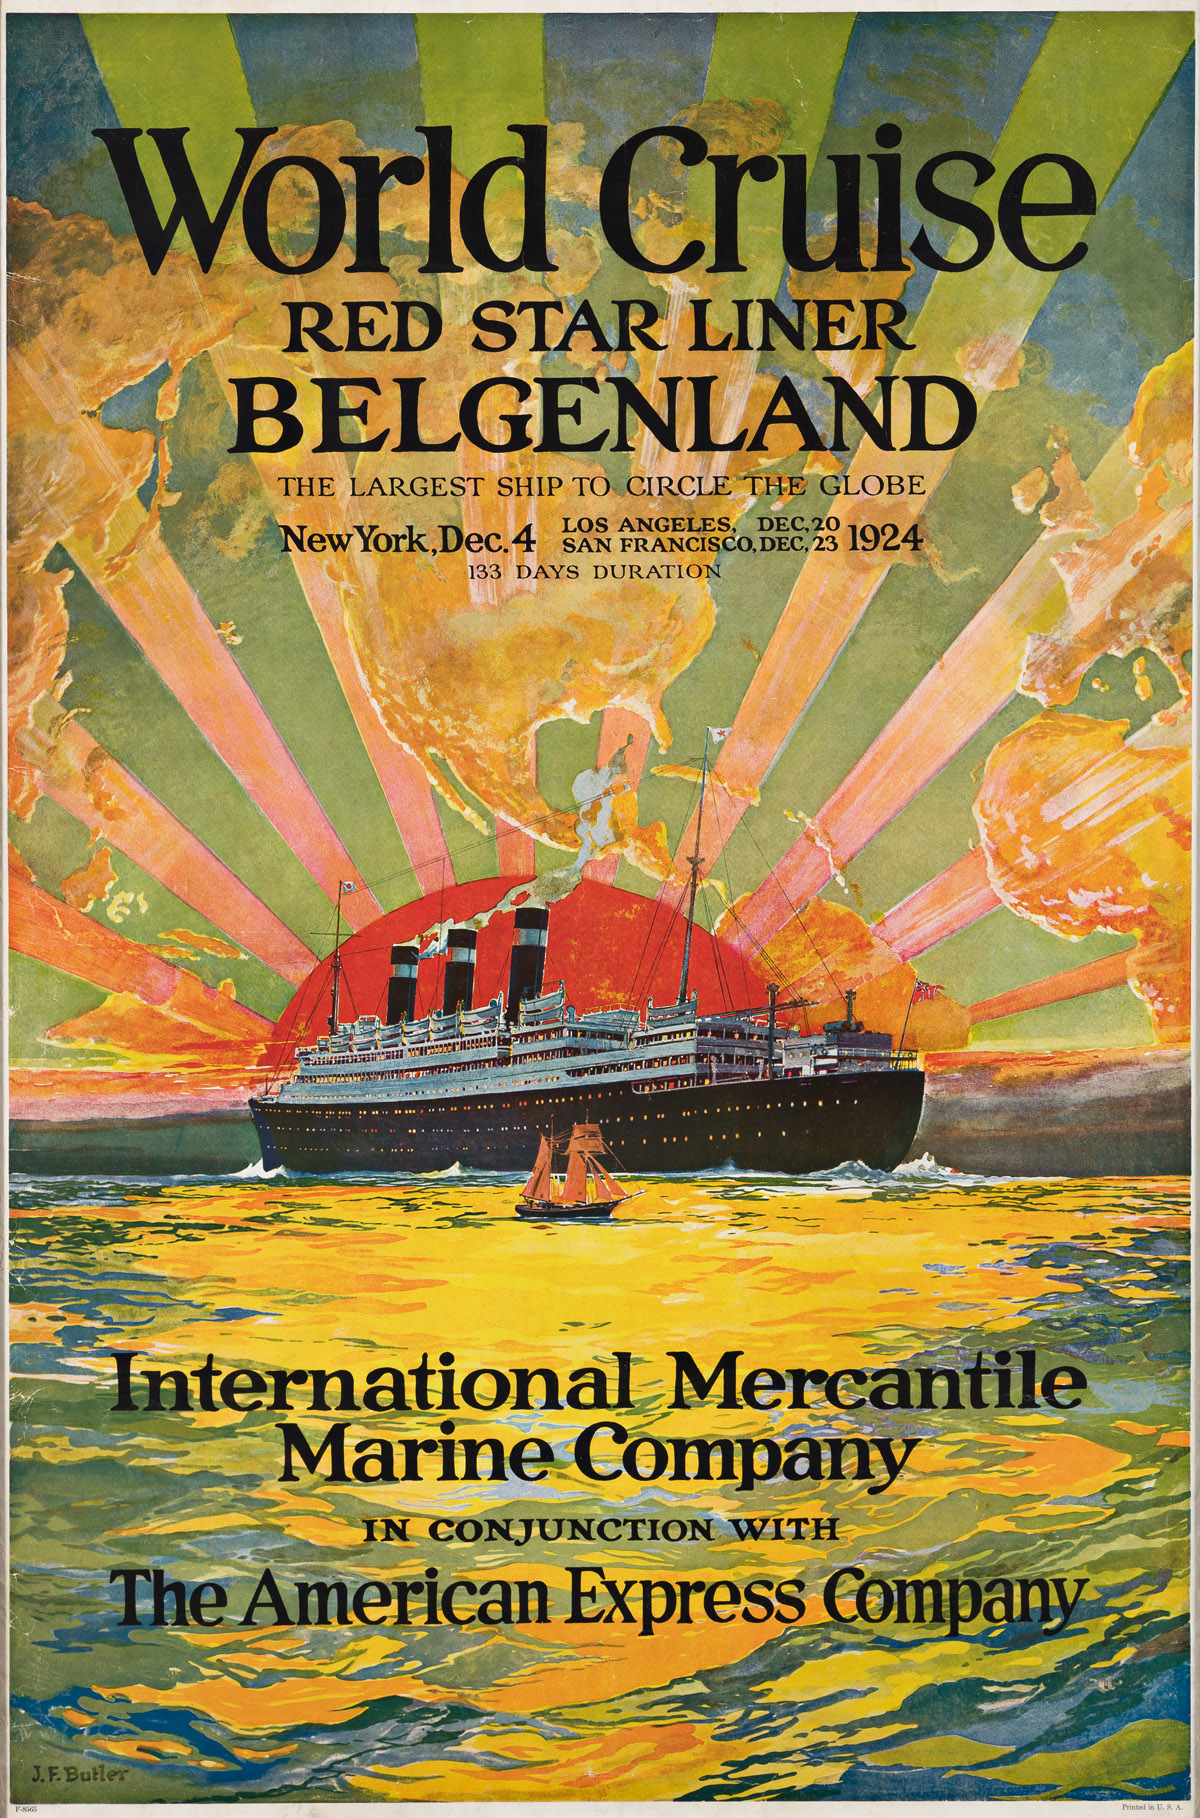 J.F. BUTLER (DATES UNKNOWN).  WORLD CRUISE / RED STAR LINER BELGENLAND. 1924. 42x27¾ inches, 106½x70½ cm.